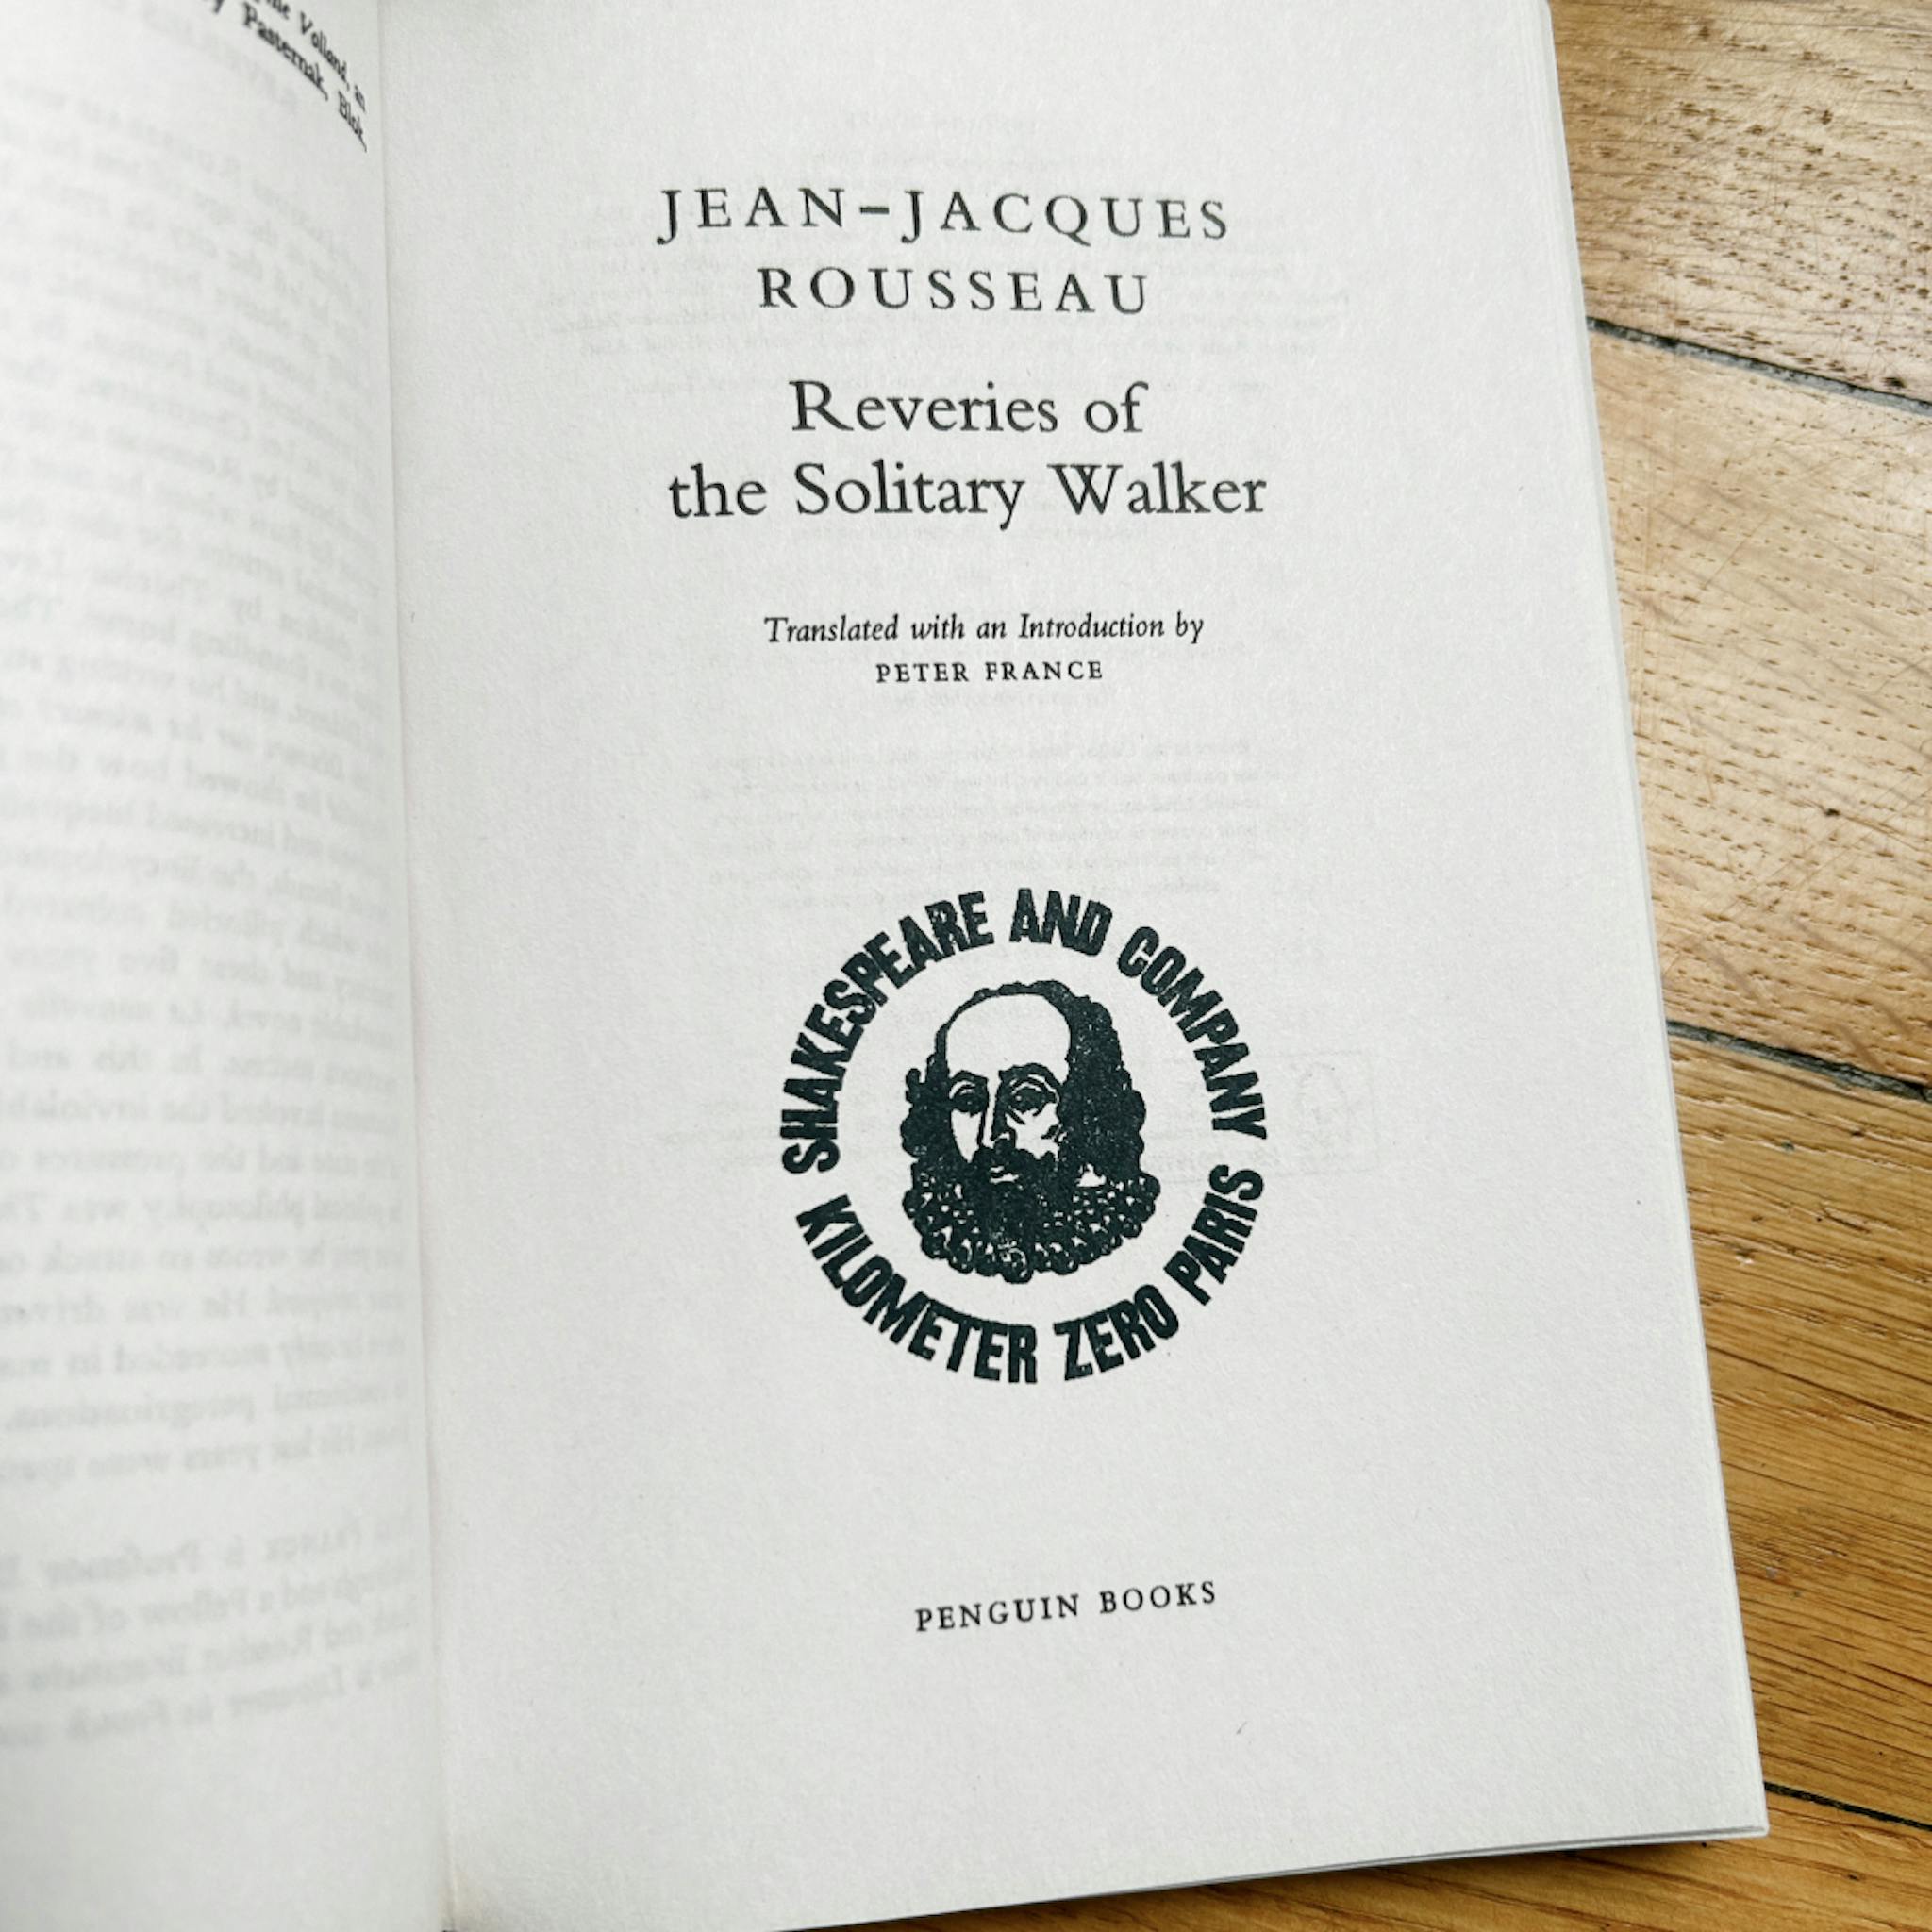 Close up title page to a book by Jean-Jacques Roussea's "Reveries of the Solitary Walker."